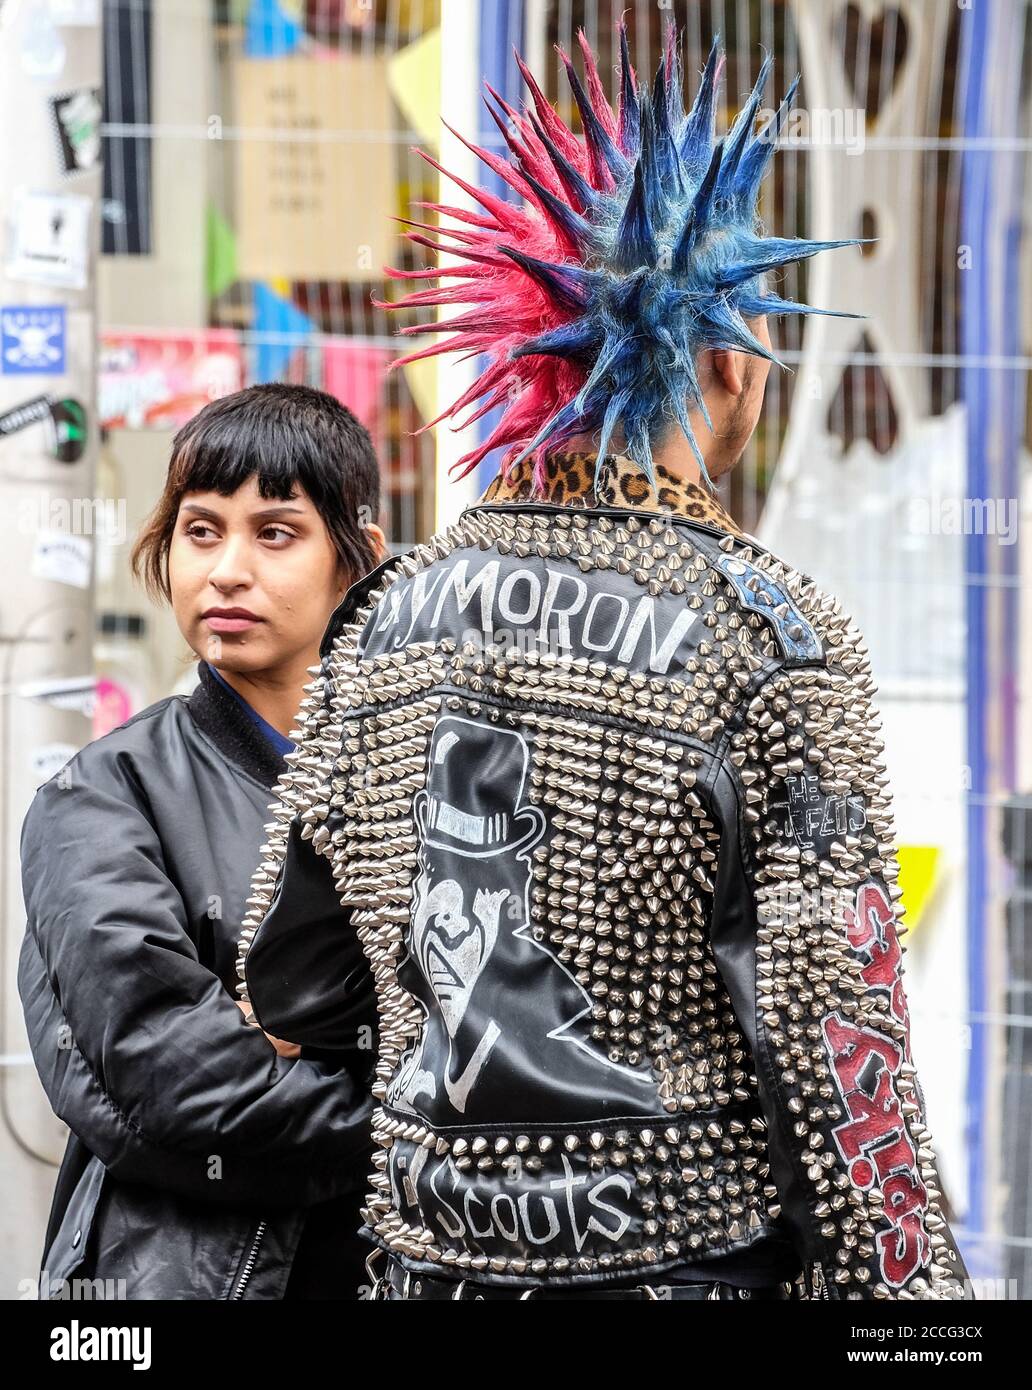 punks with vivid liberty spike hair styles Stock Photo